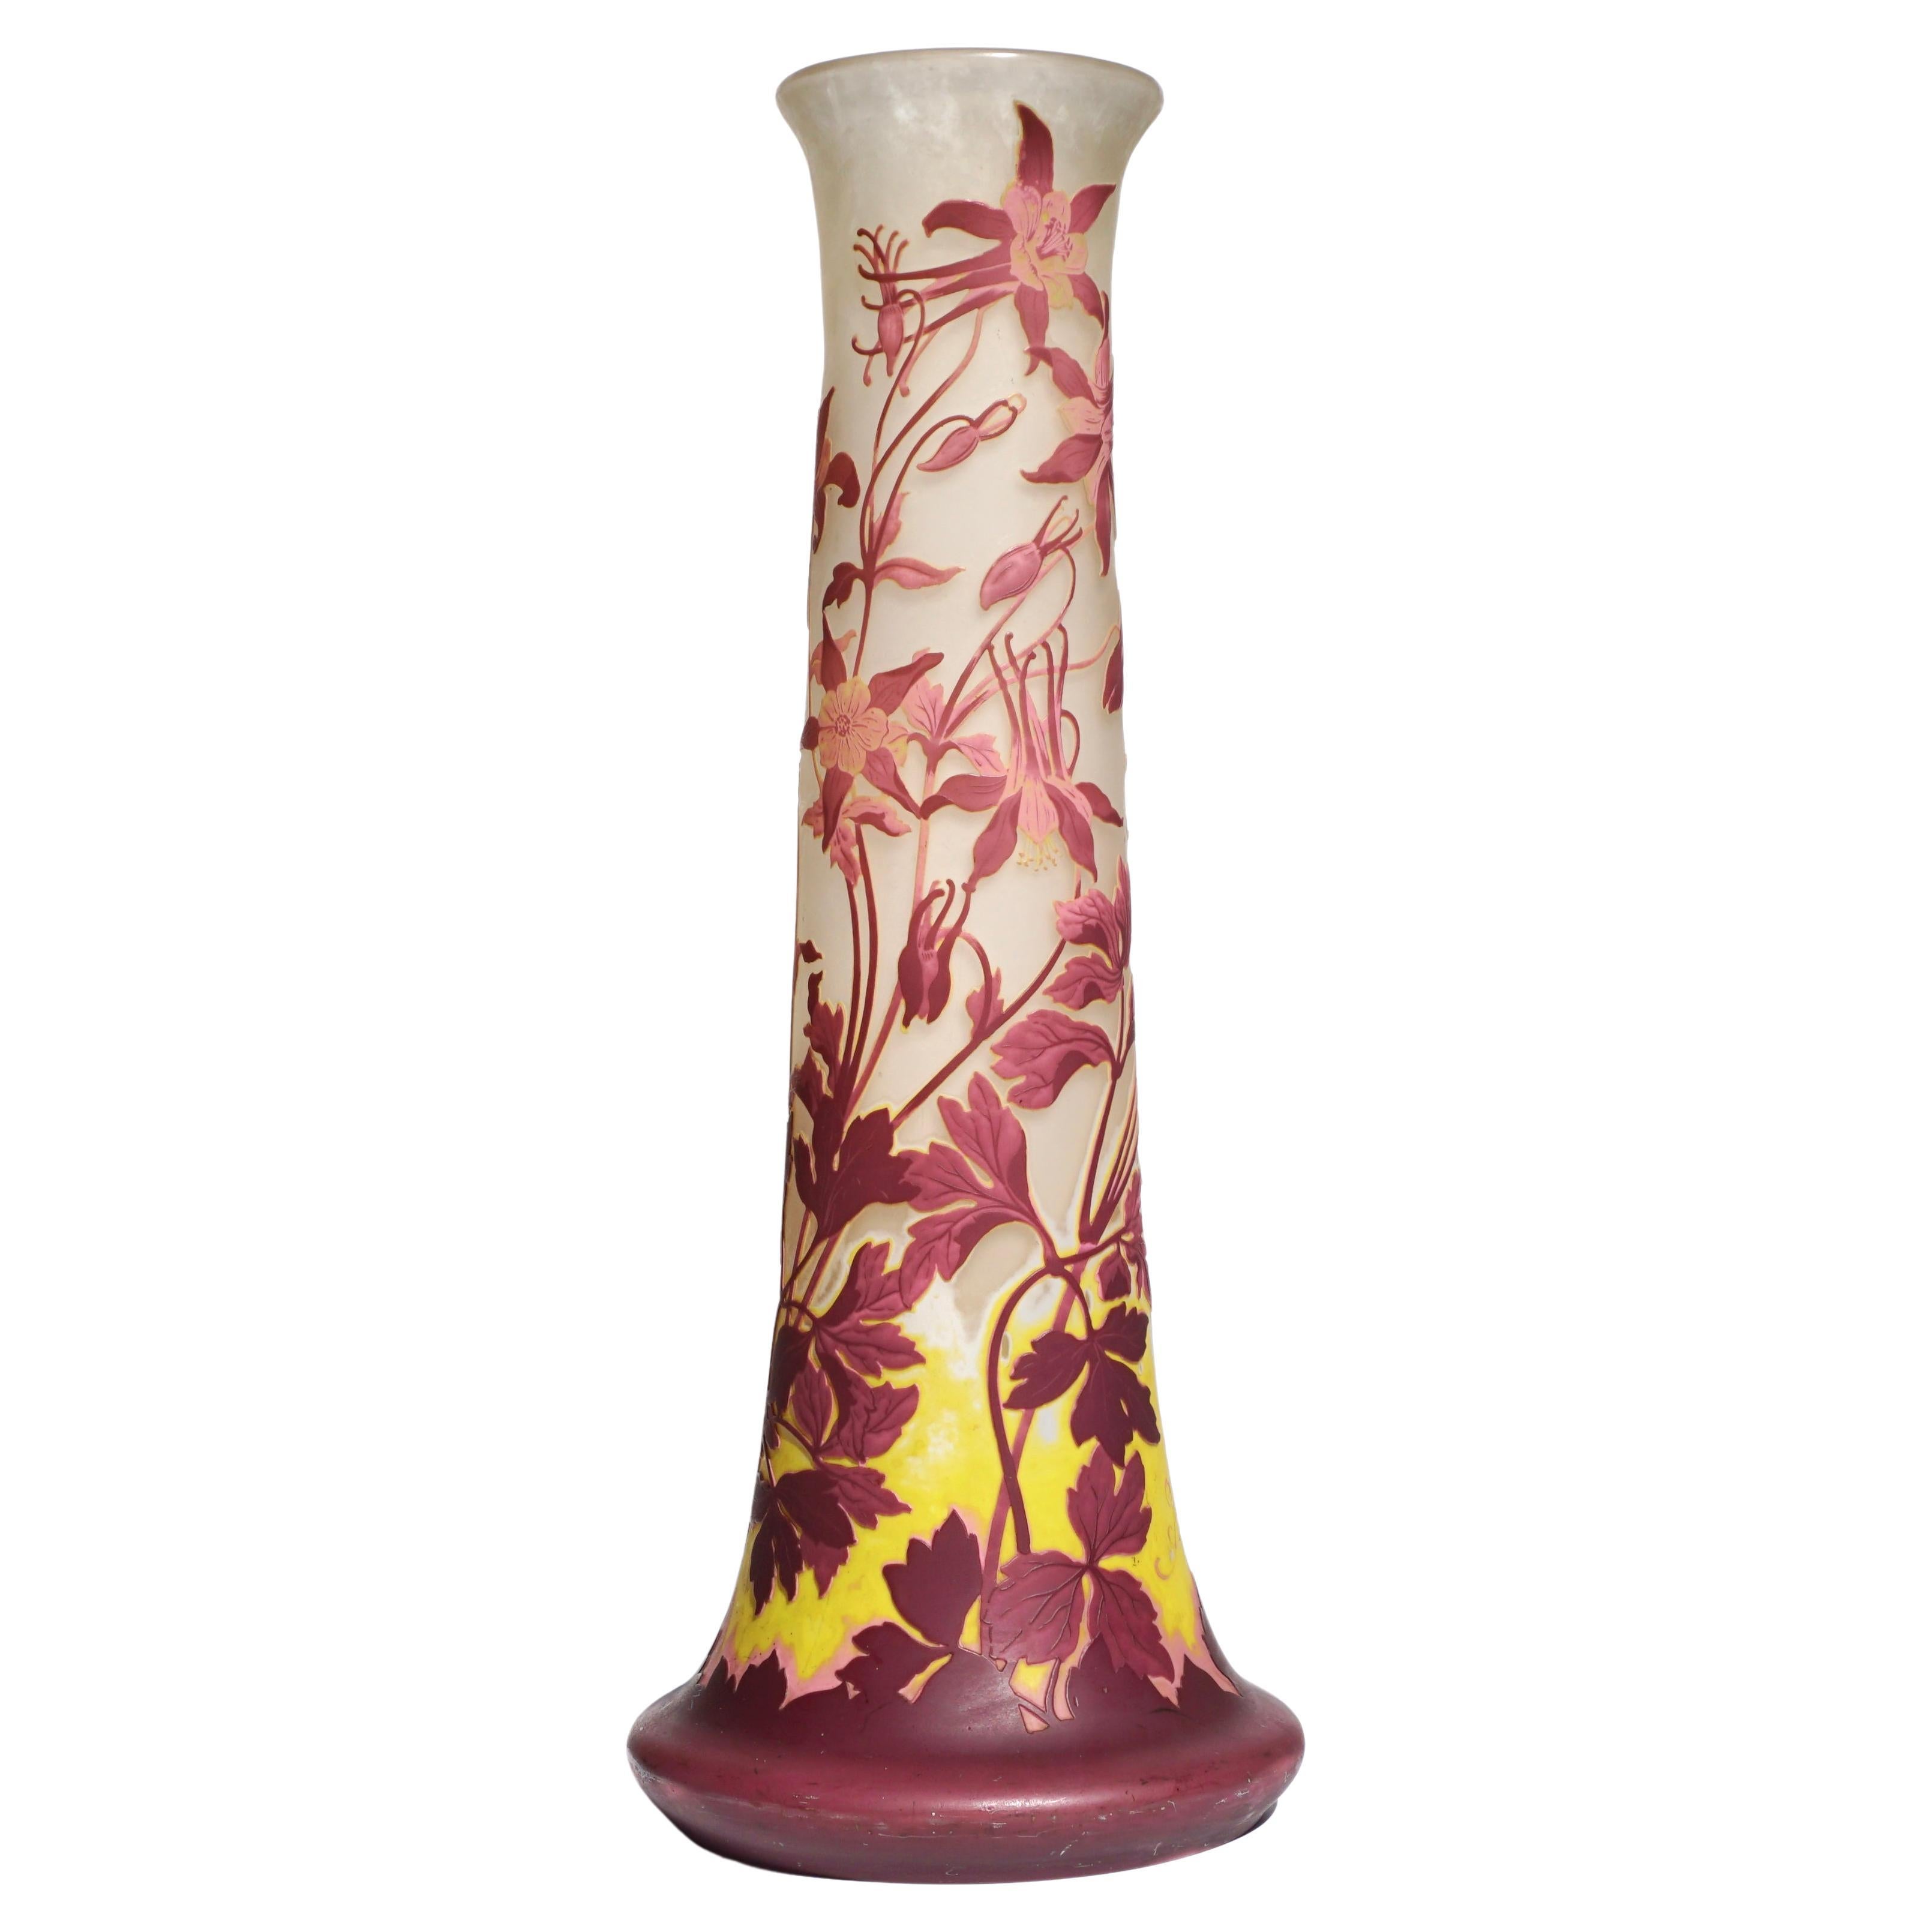 Monumental 24’ Emile Galle Four Color Cameo Vase For Sale